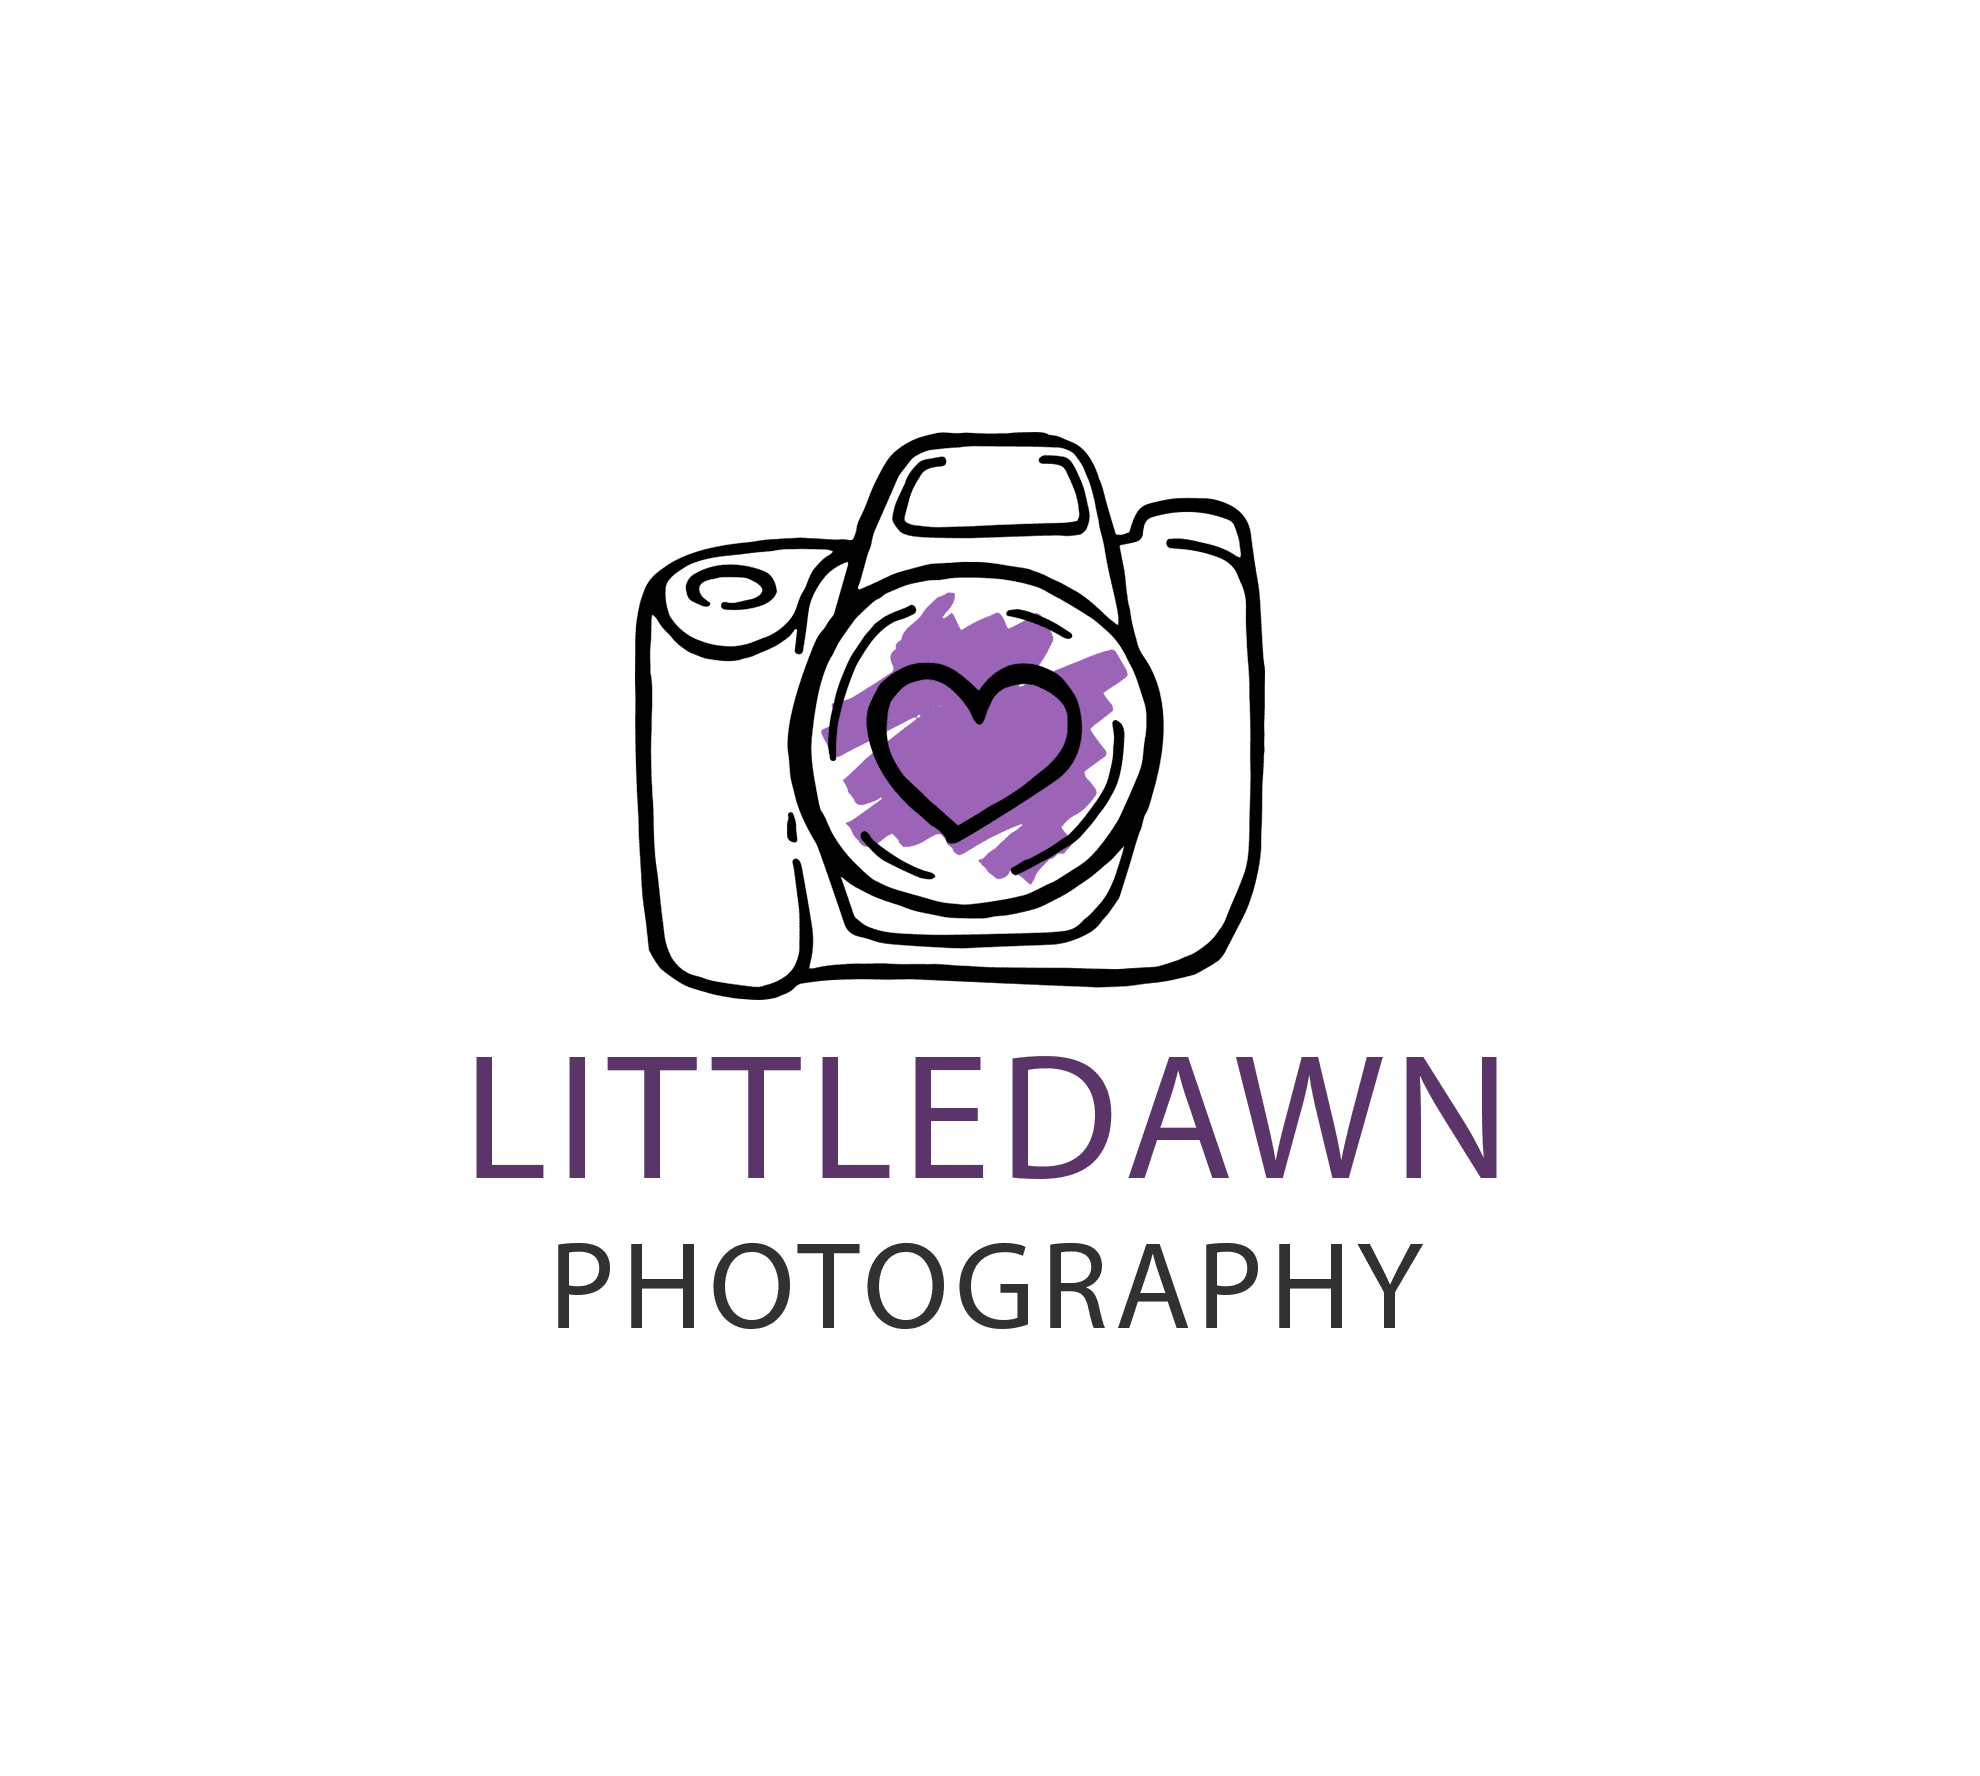 LittleDawn Photography